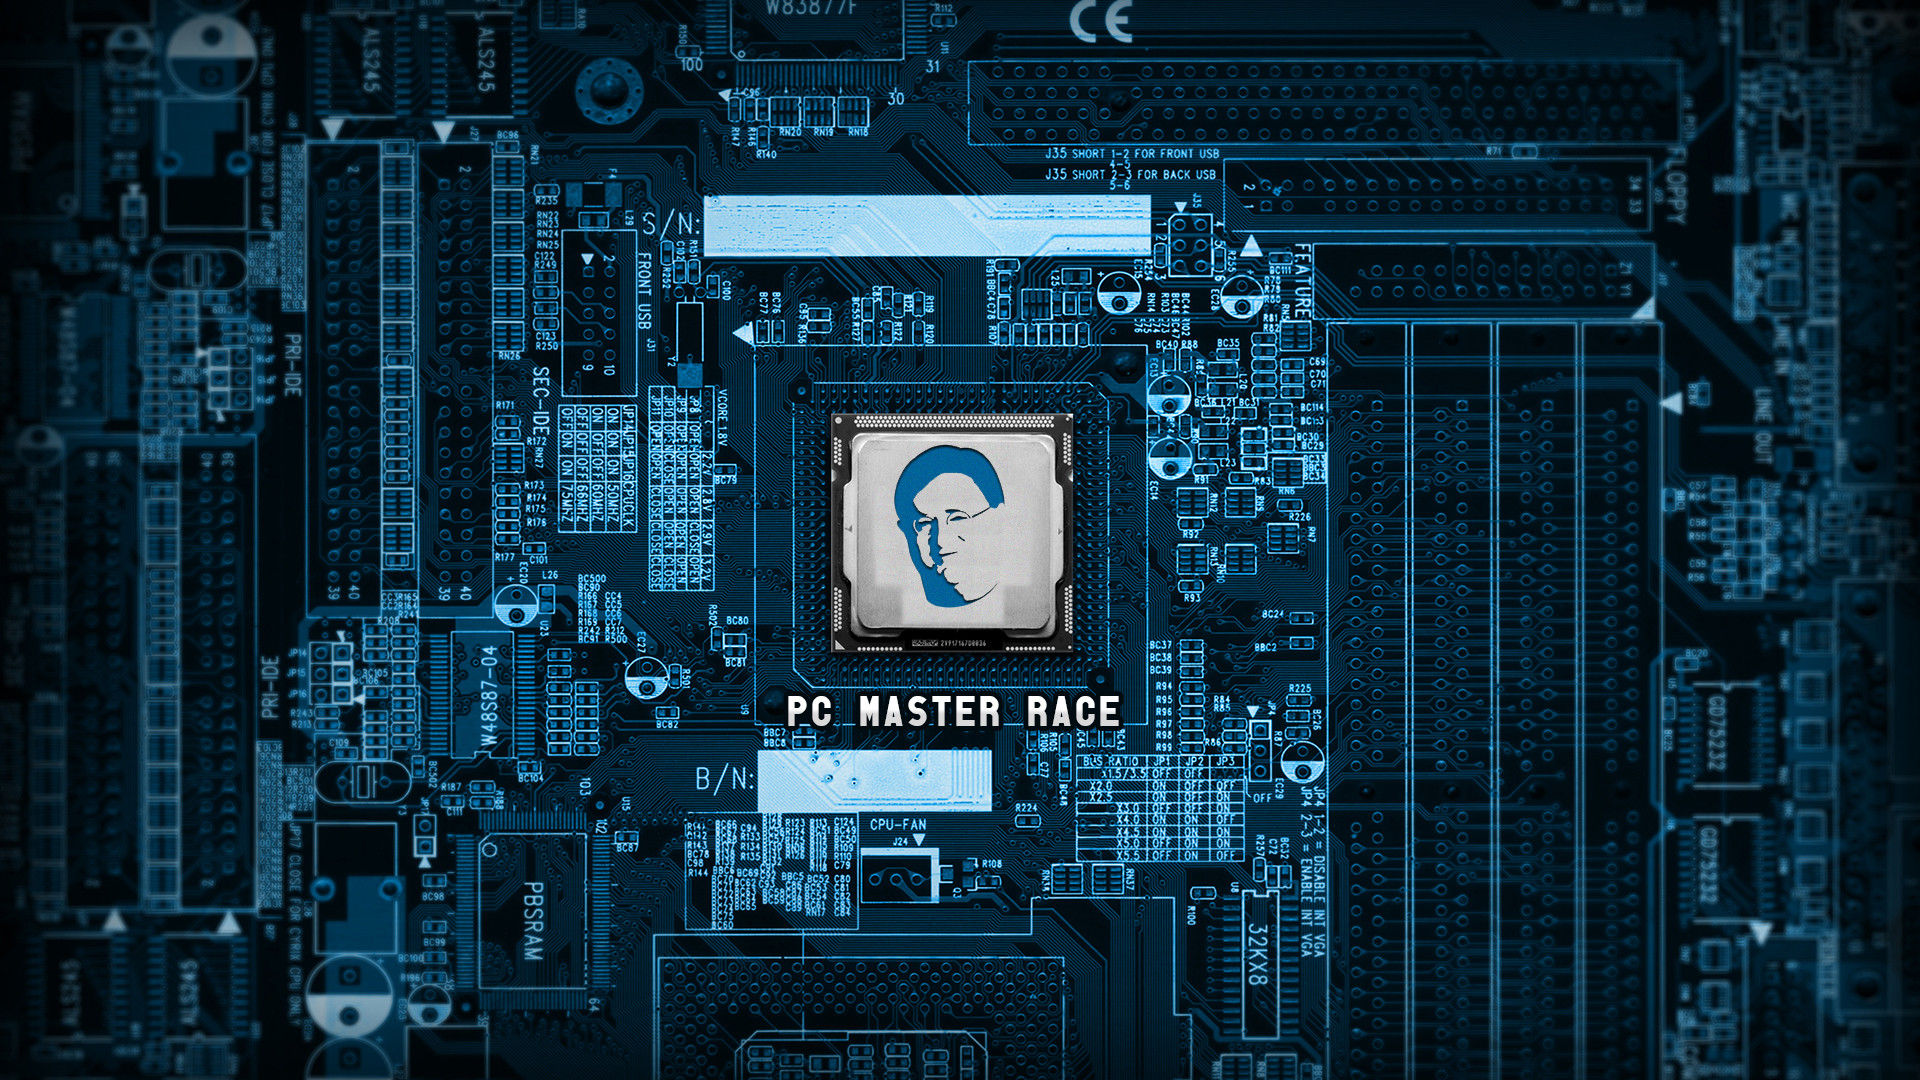 Glorious ScreenshotI made a wallpaper for the master race. What do you think